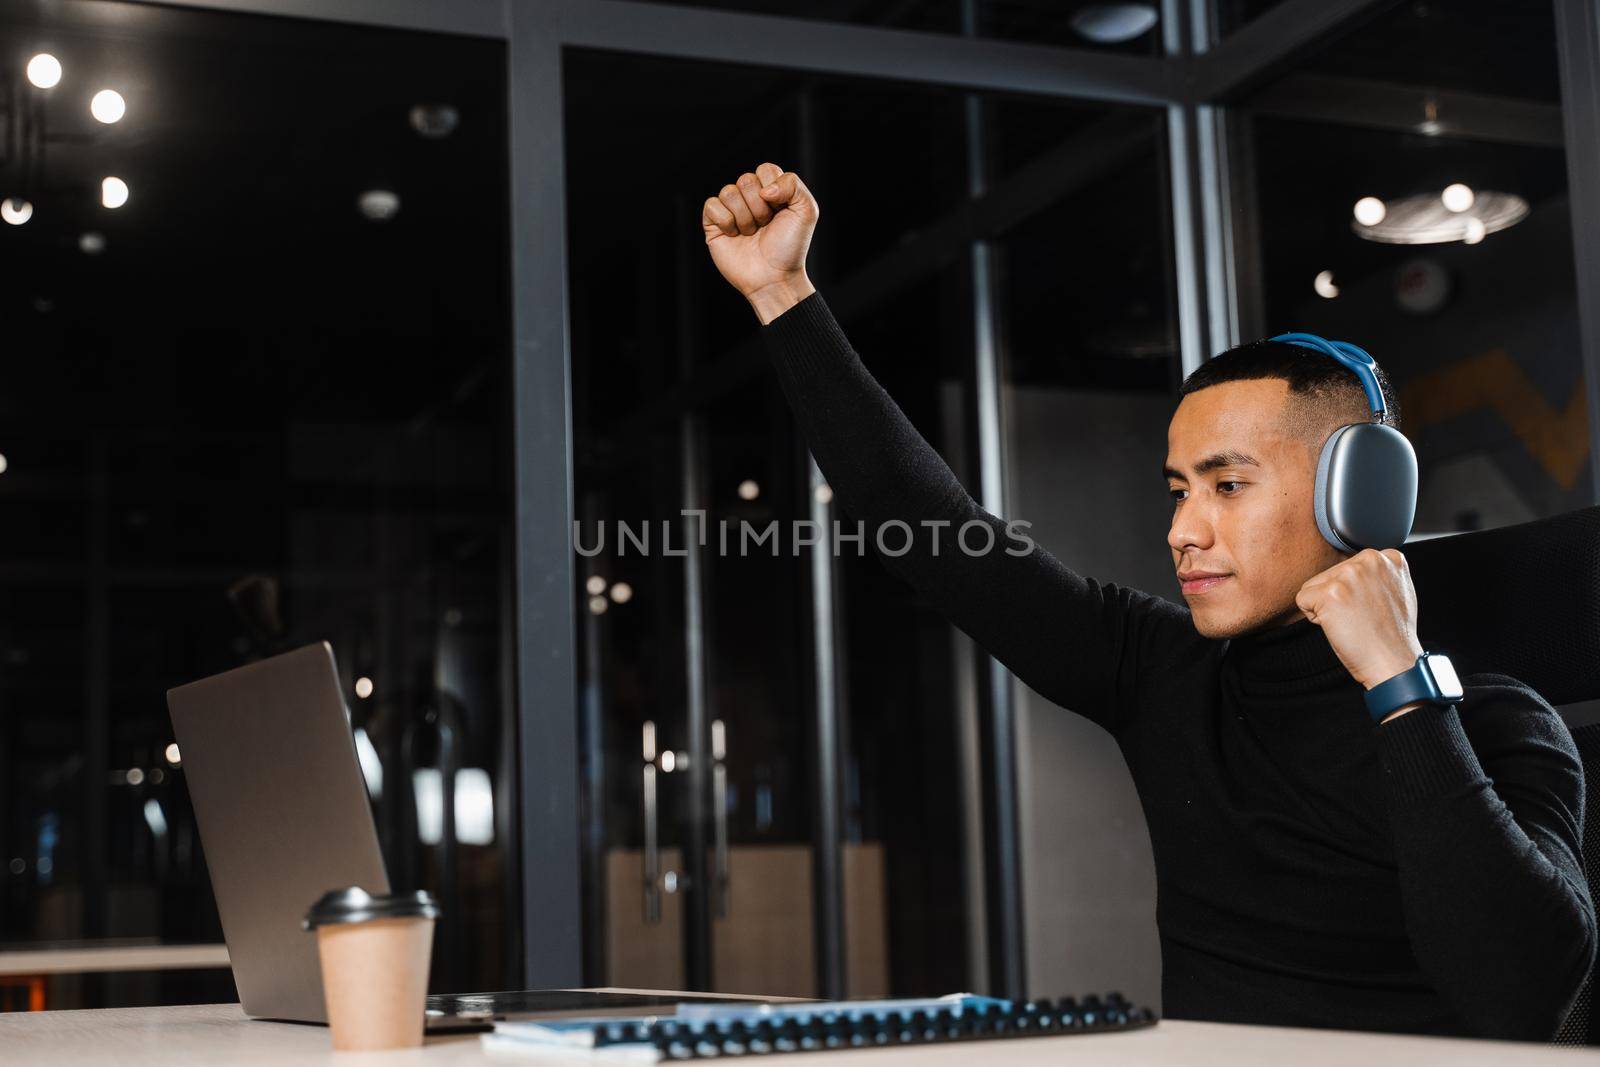 Asian man raises his hands and win bet online and earn money. Happy filipino guy with laptop and headphones celebrating victory in game.